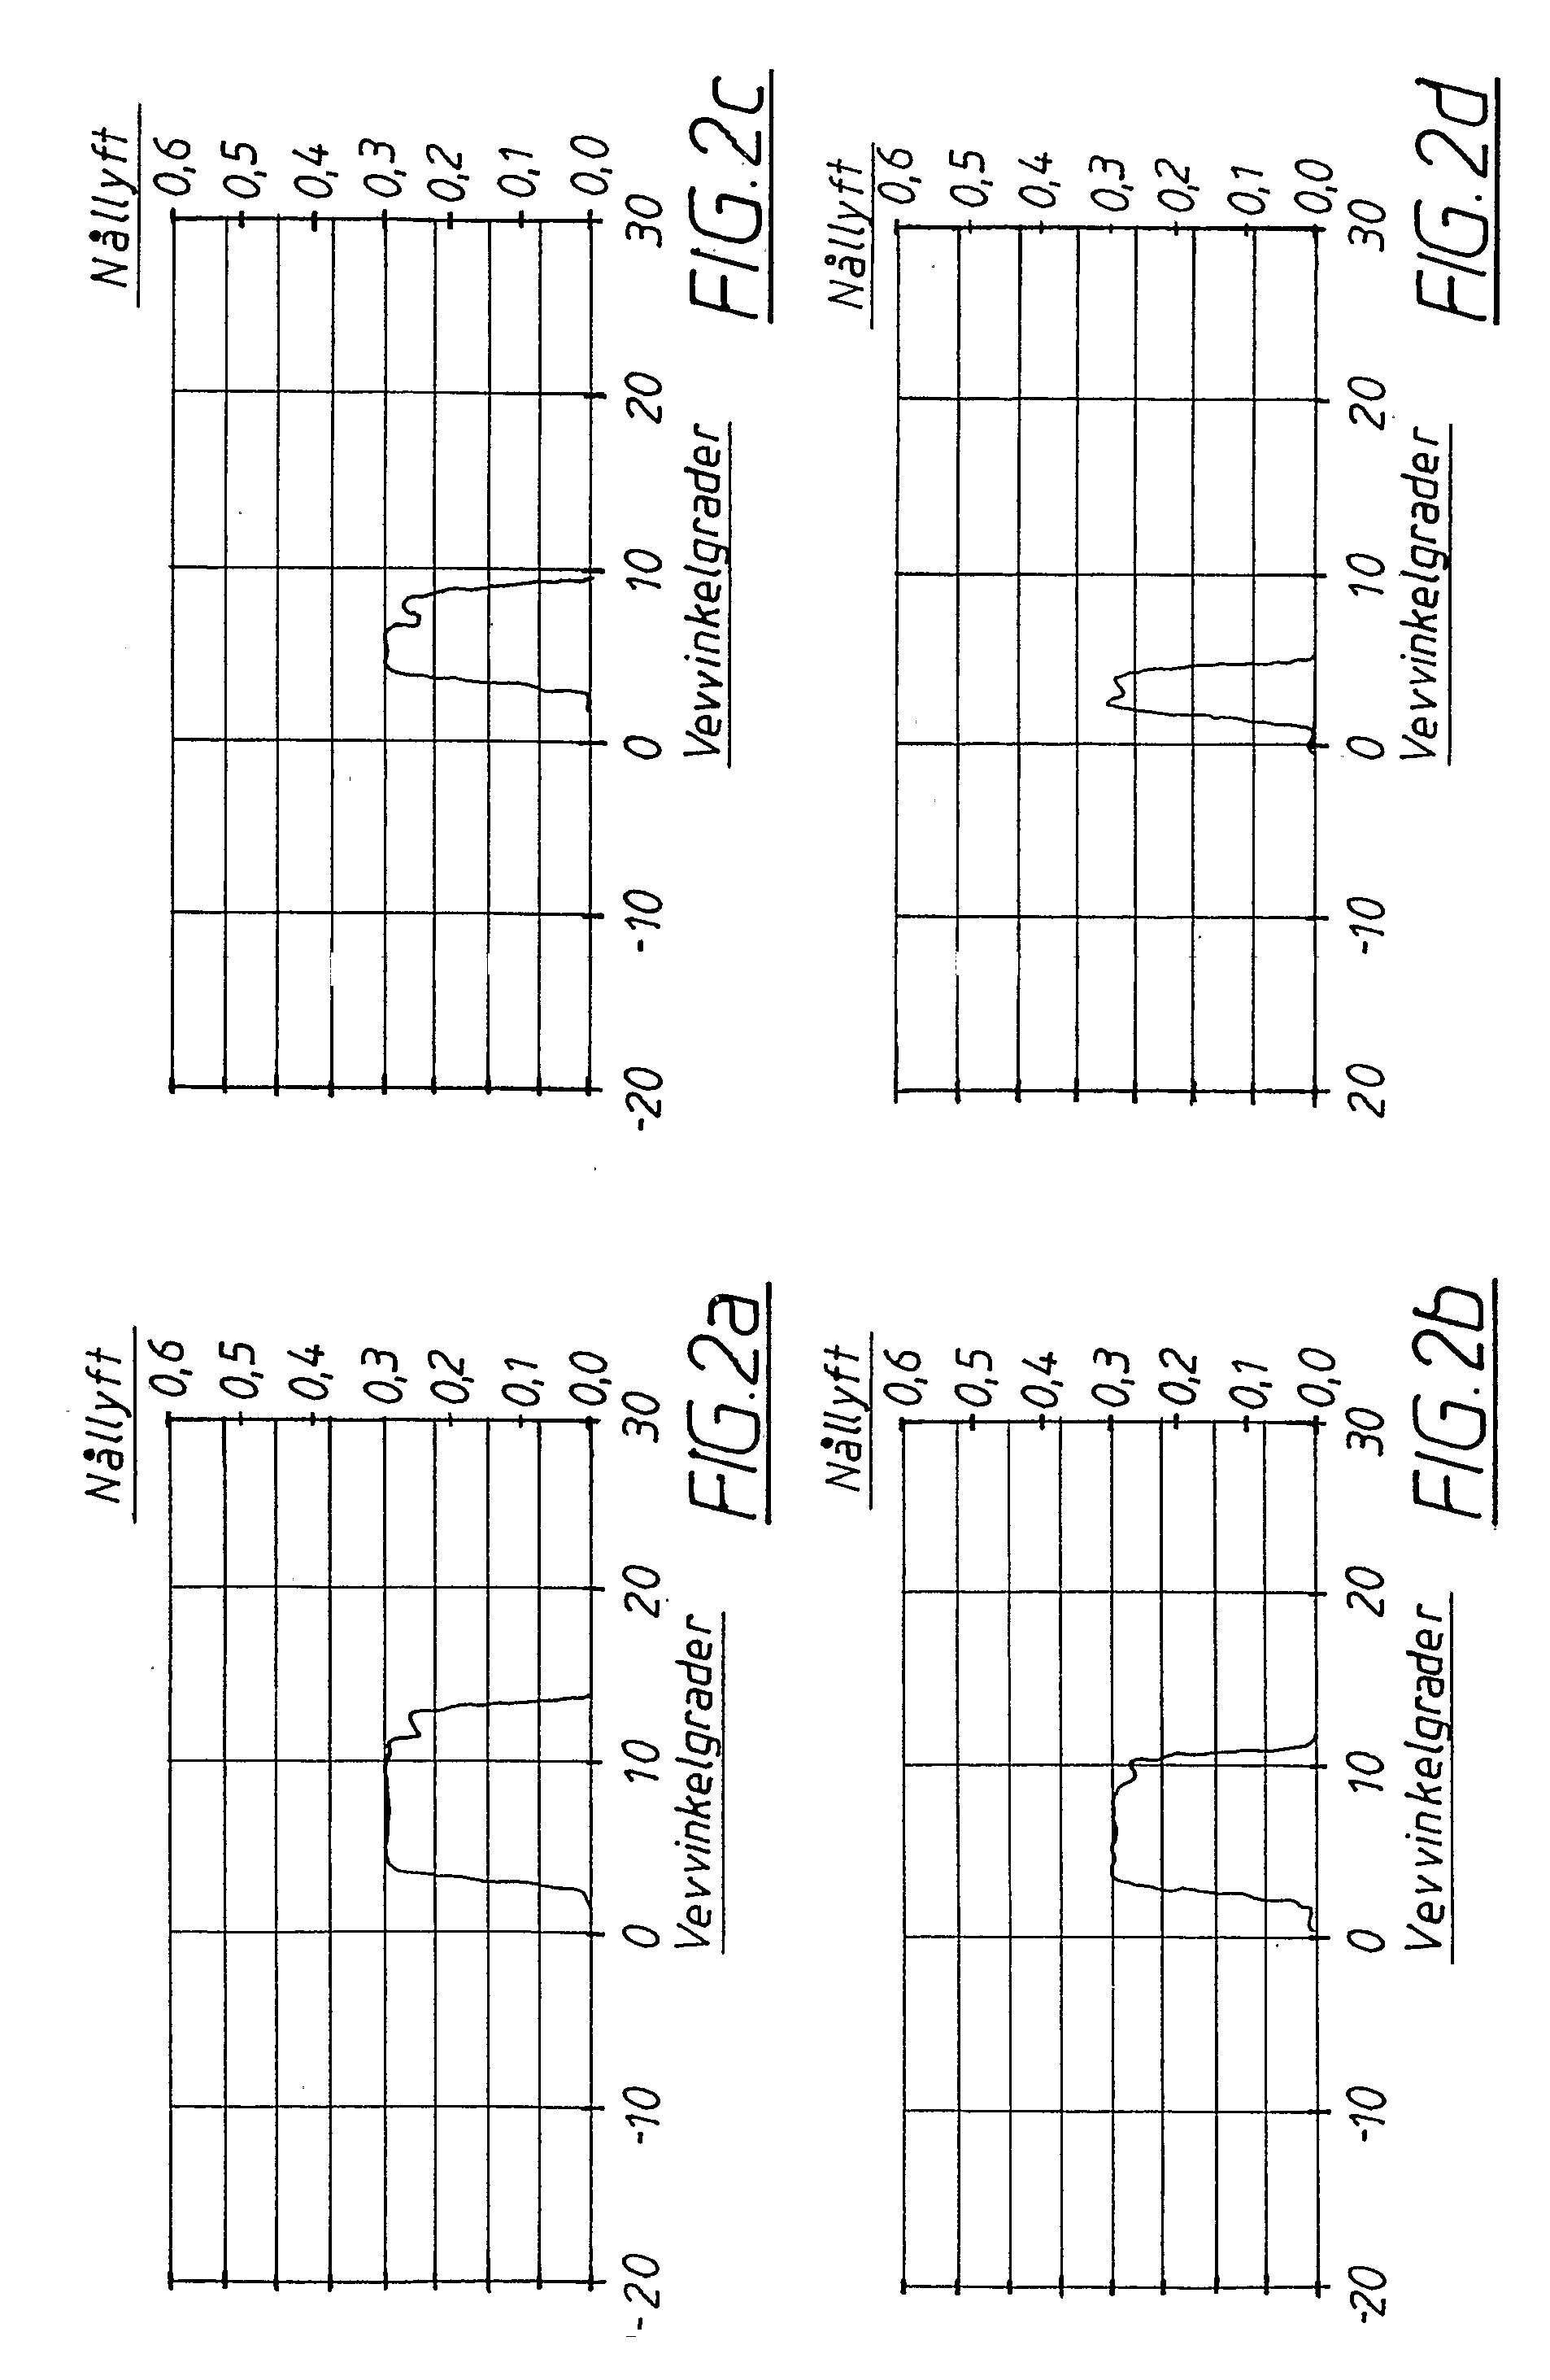 Diesel-type piston engine and a method for controlling a diesel-type piston engine